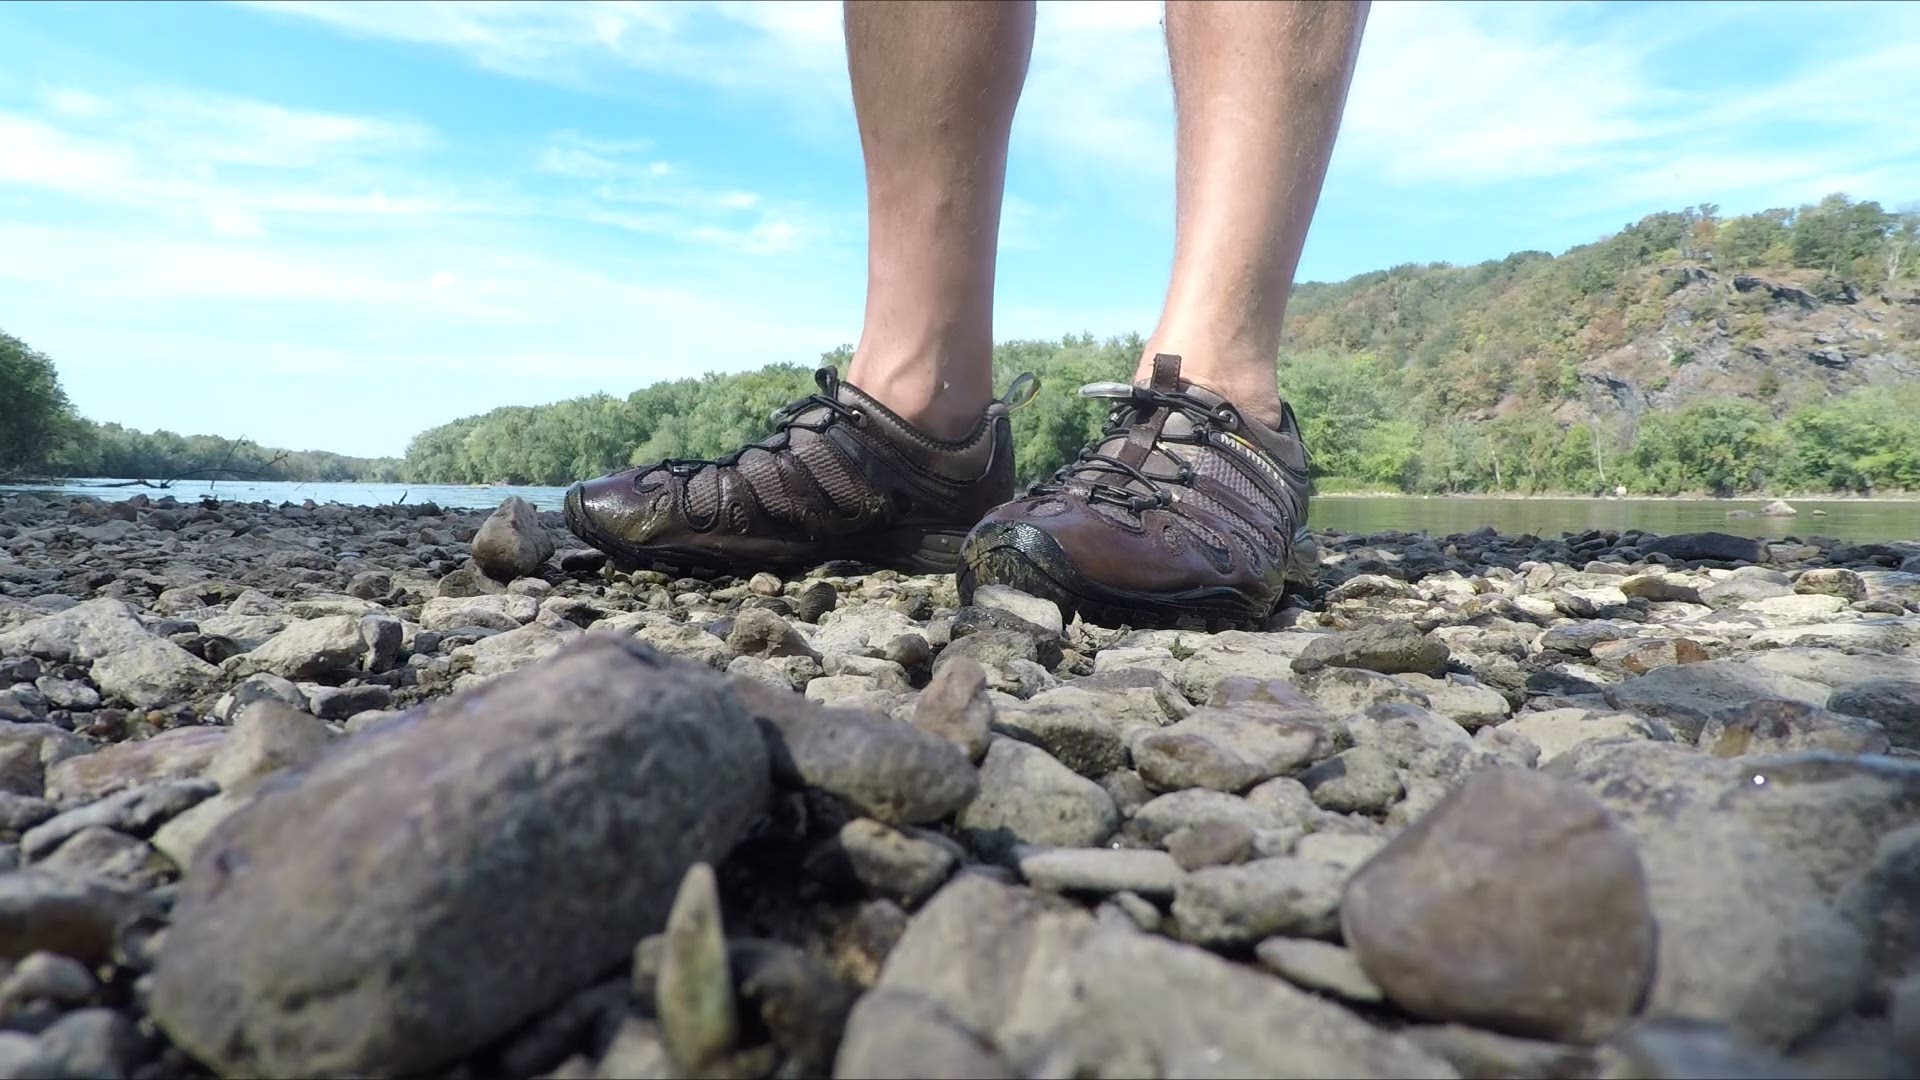 The water in the Potomac River is currently so low in some areas that you can get across by foot.